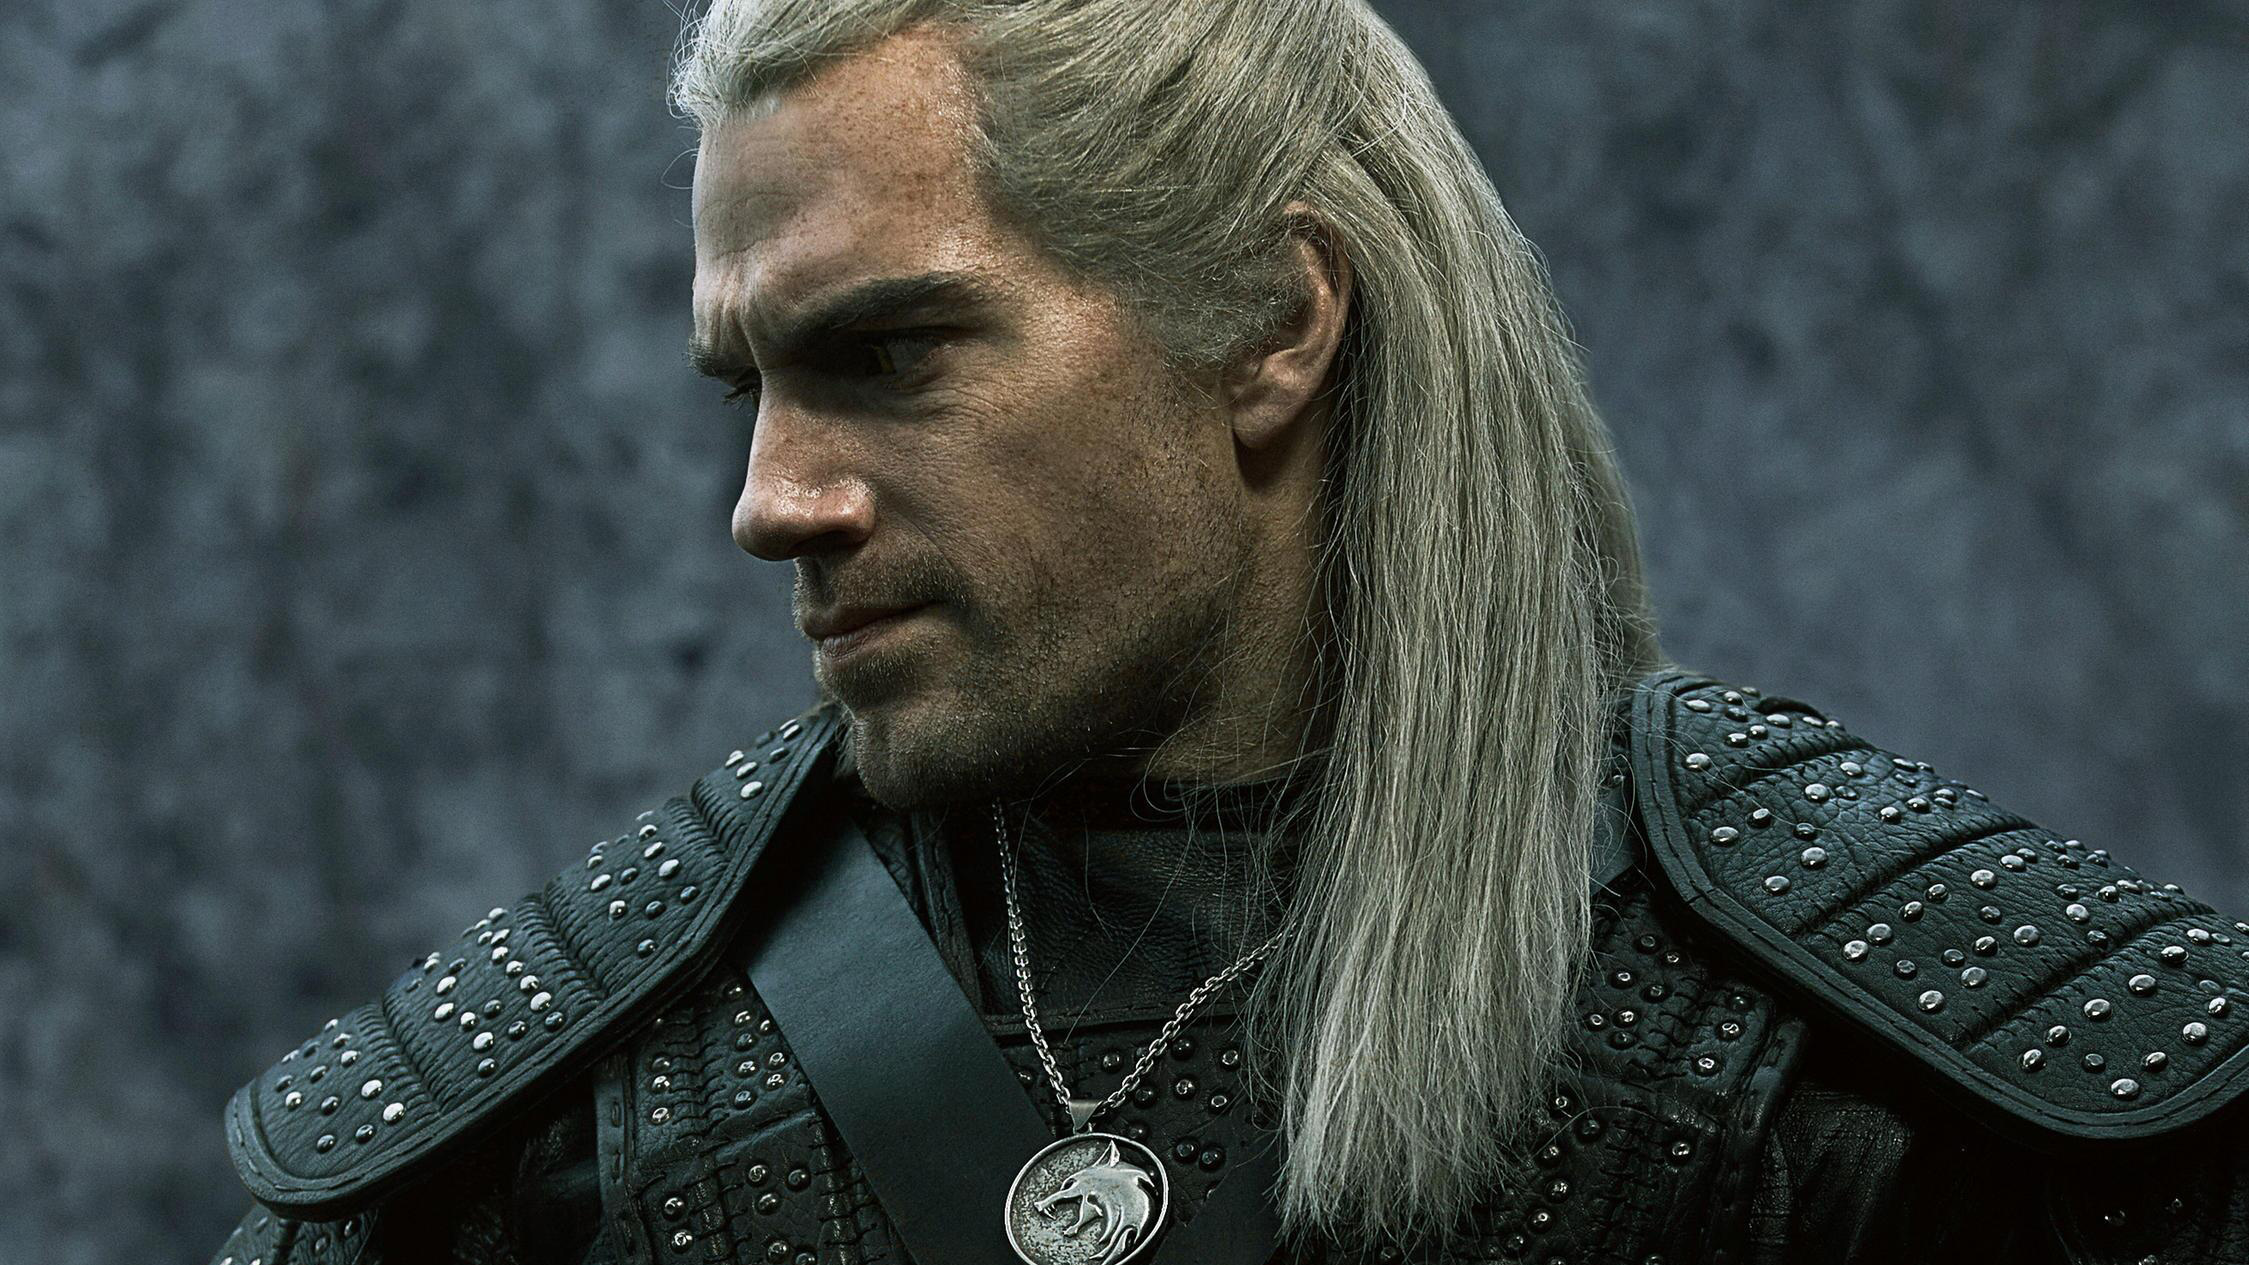 Henry Cavill Geralt The Witcher 2019 HD Tv Shows 4k Wallpapers 39184 ...